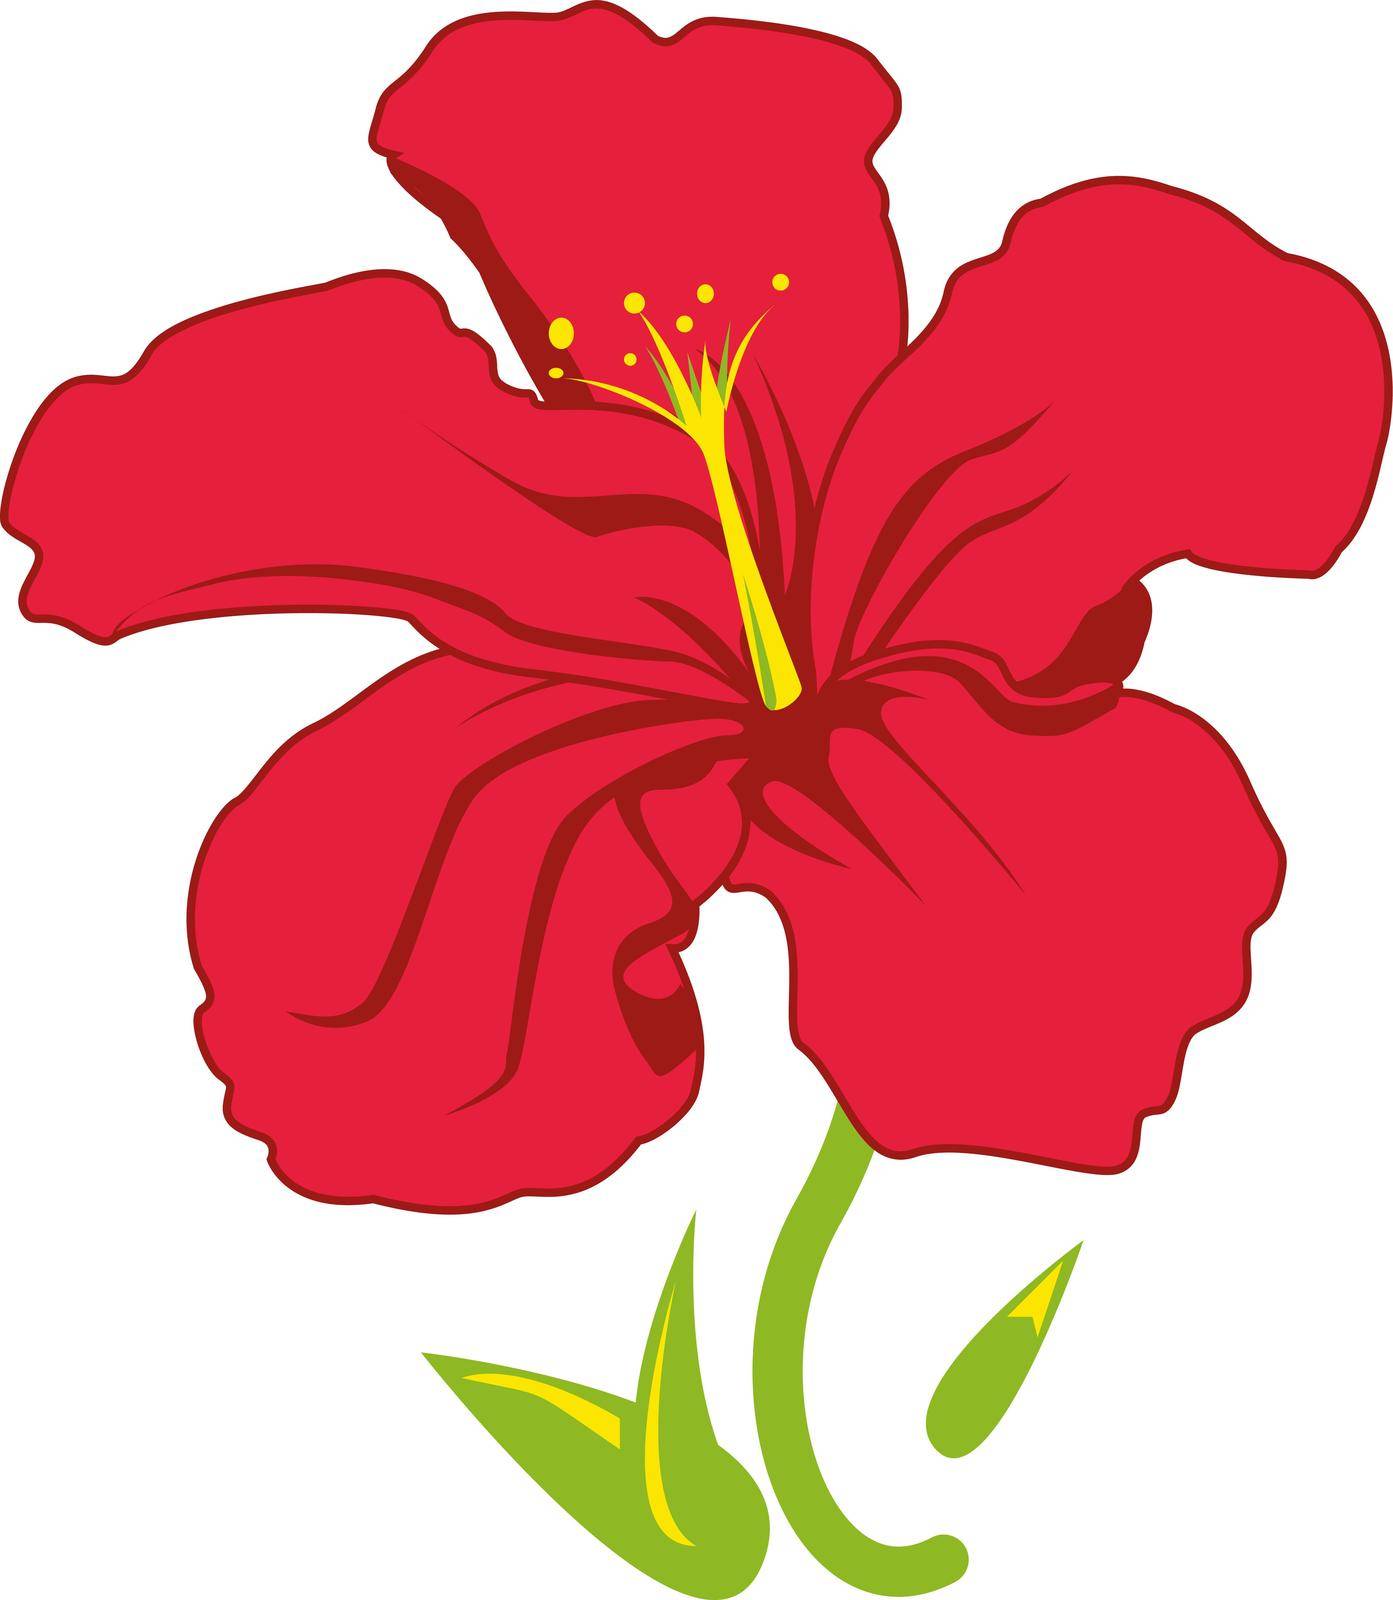 Flower Of Red Hibiscus - isolated on white background by Arinase